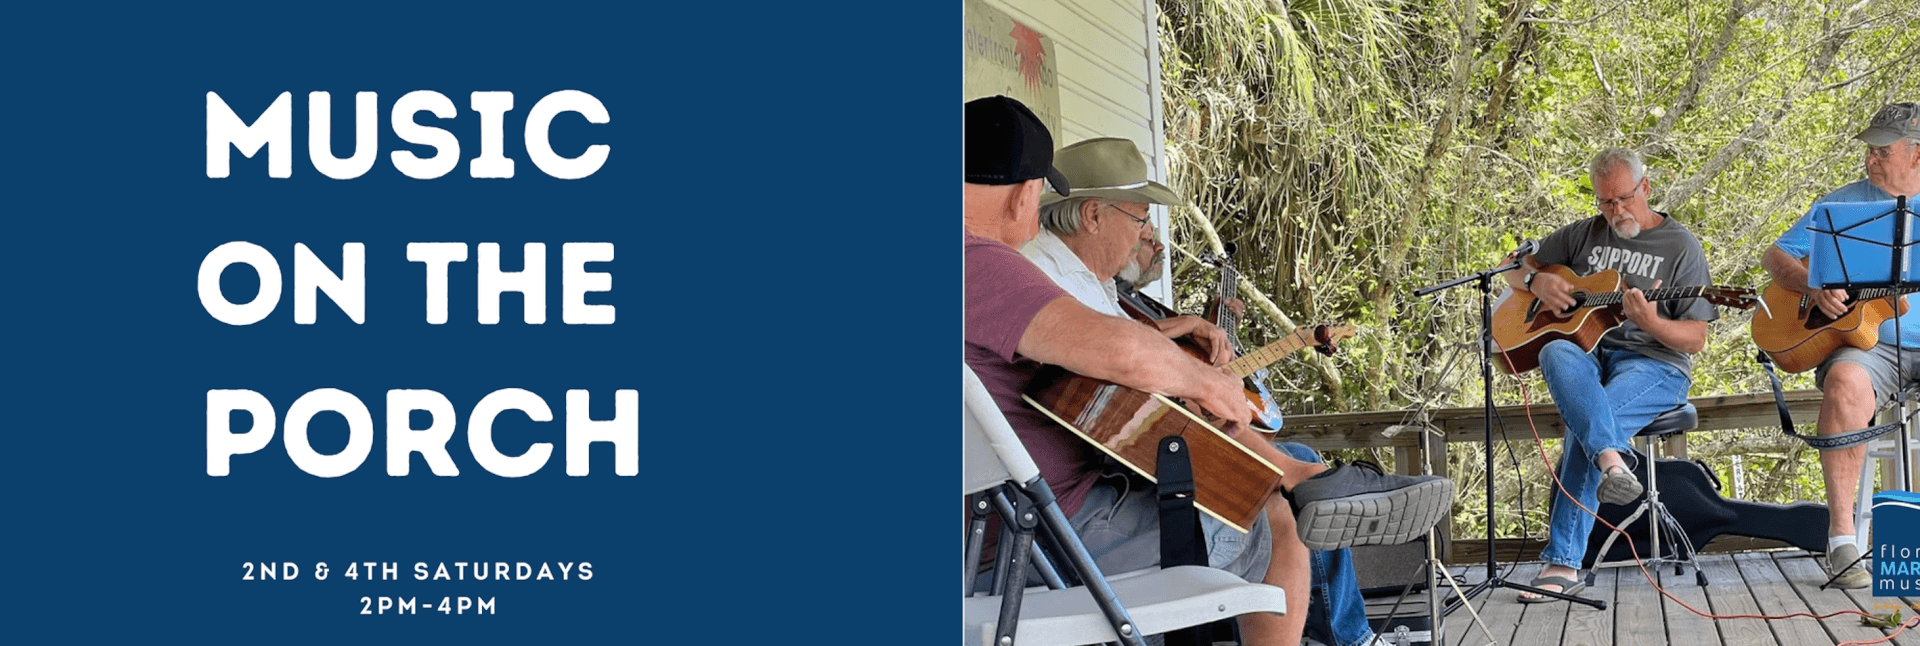 music on the porch graphic with four men playing instruments